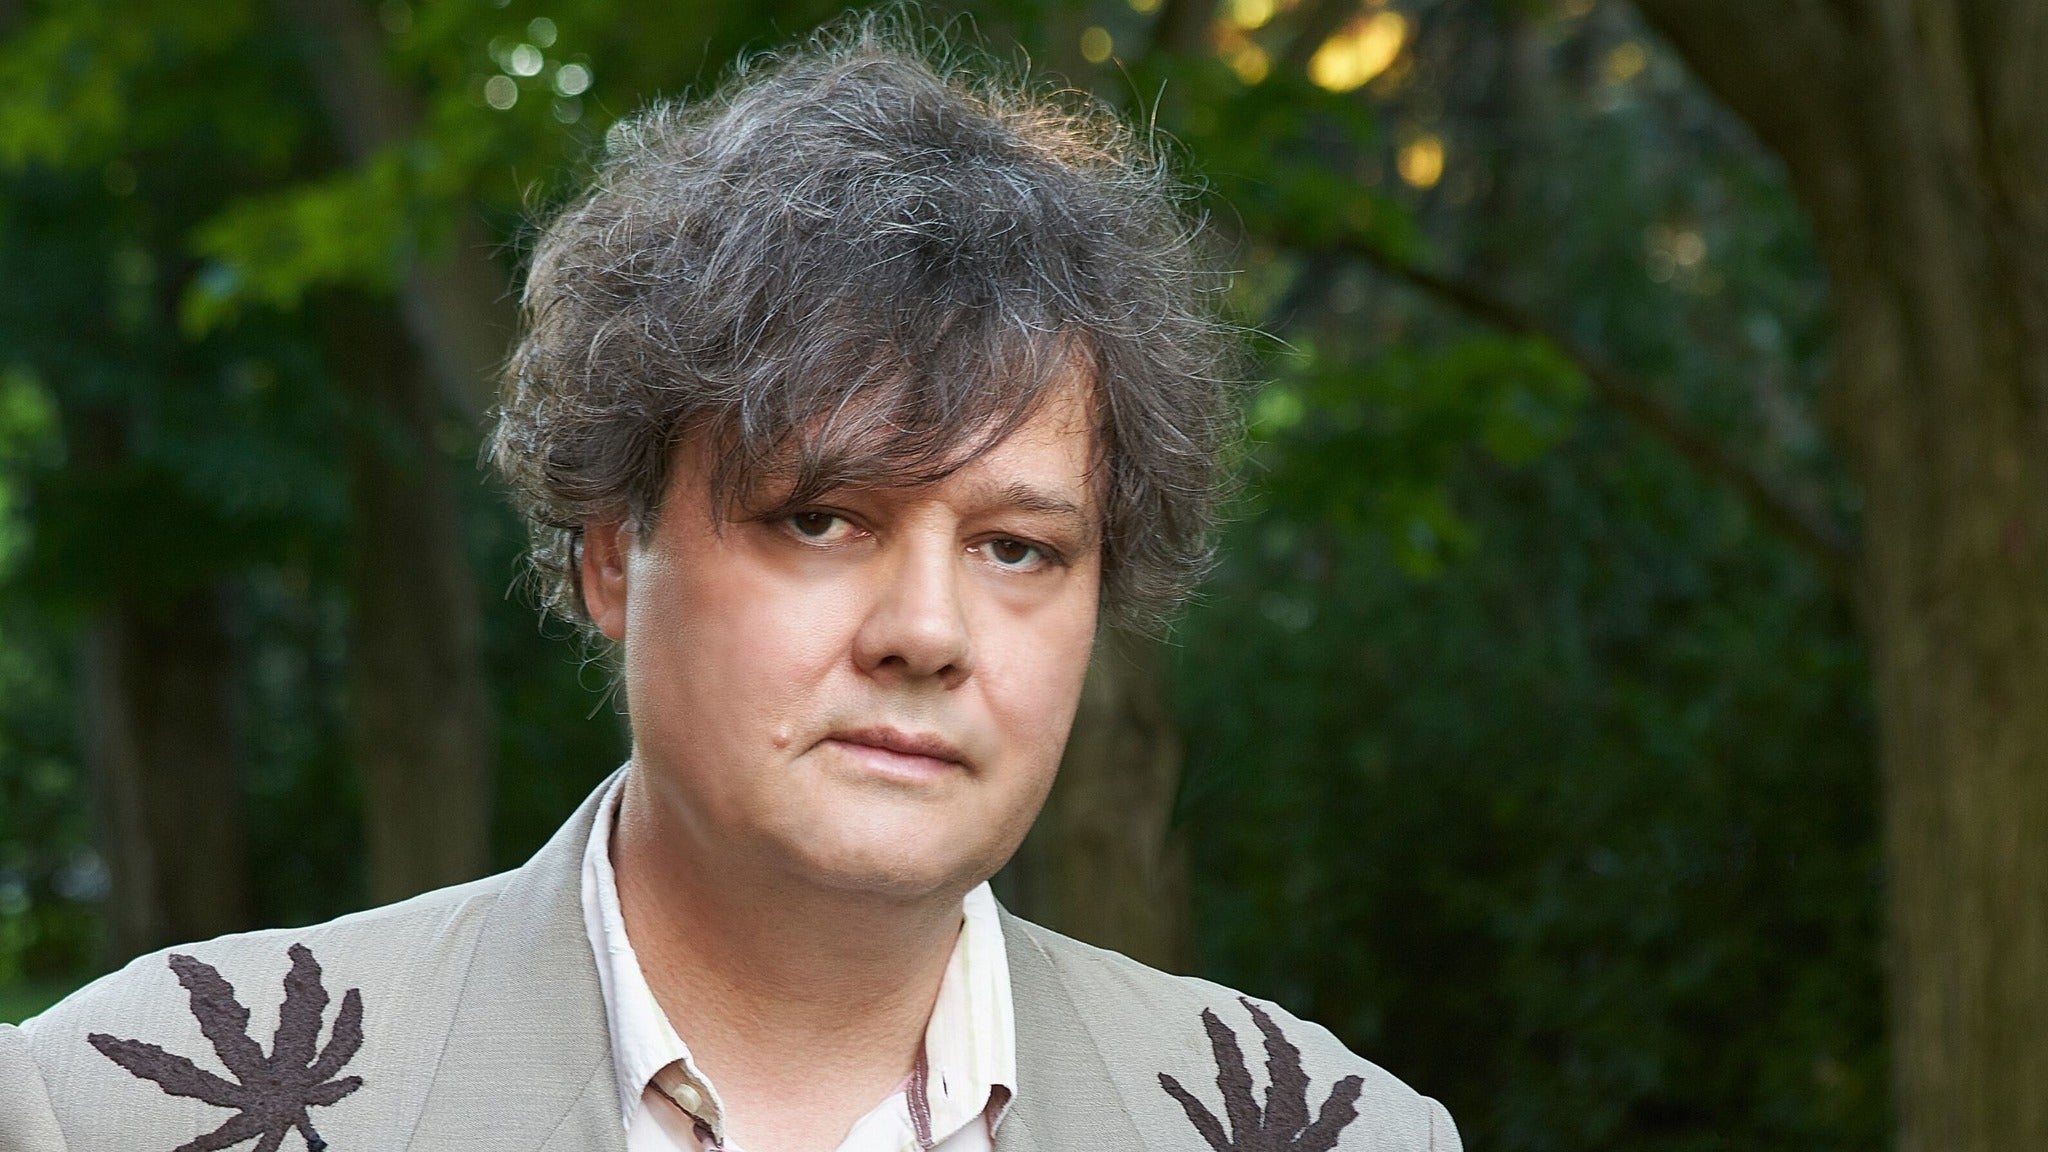 Image used with permission from Ticketmaster | An Evening with Ron Sexsmith tickets